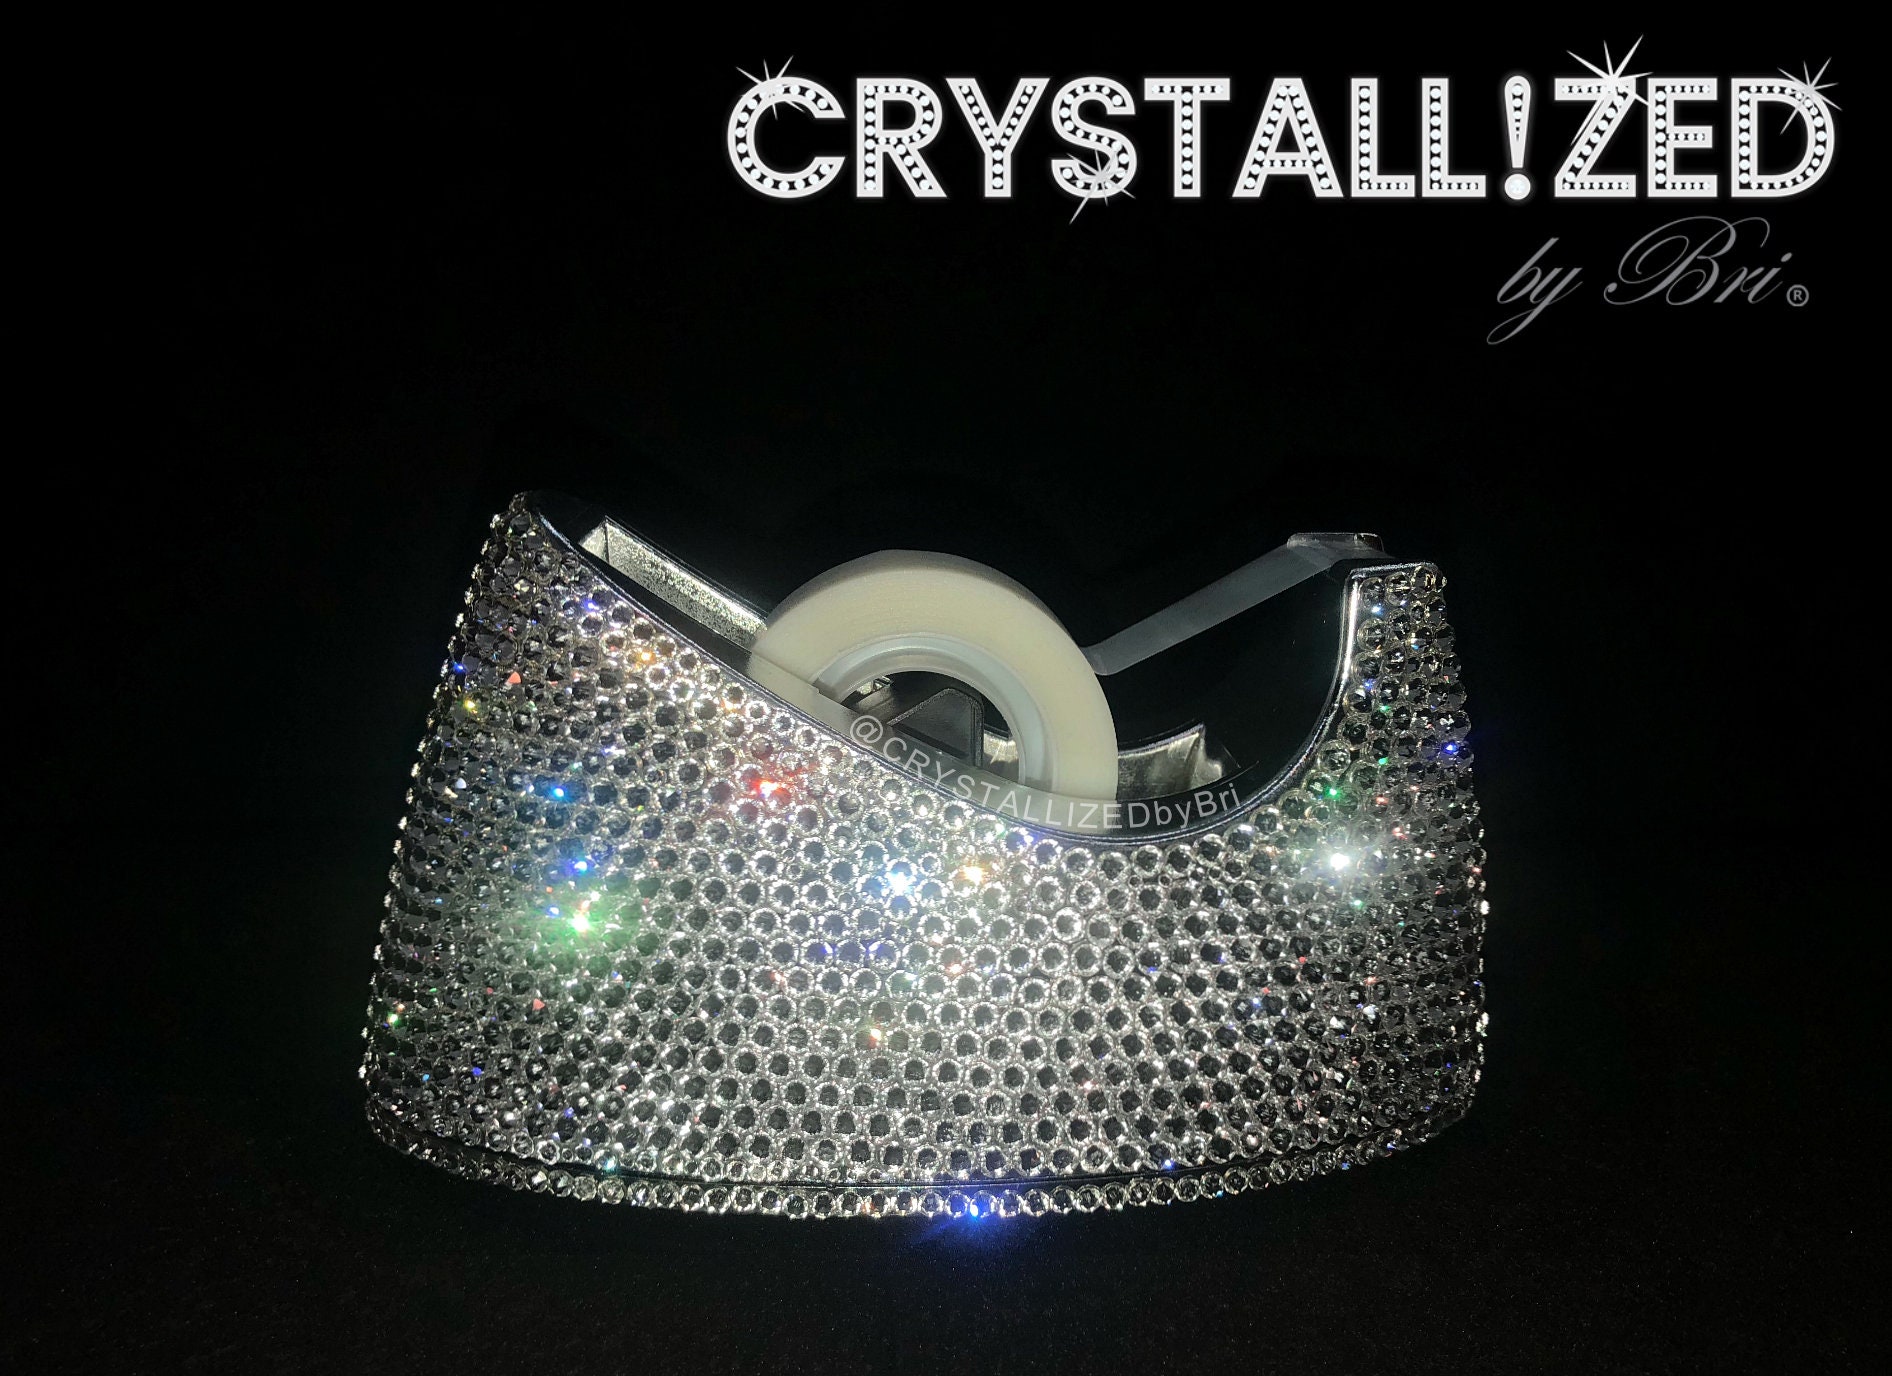 Austrian Crystal Embellished Tape Dispenser Crystals Bling Full Size Work  Large Desktop Office Bedazzled Accessories Crystallized Weighted 